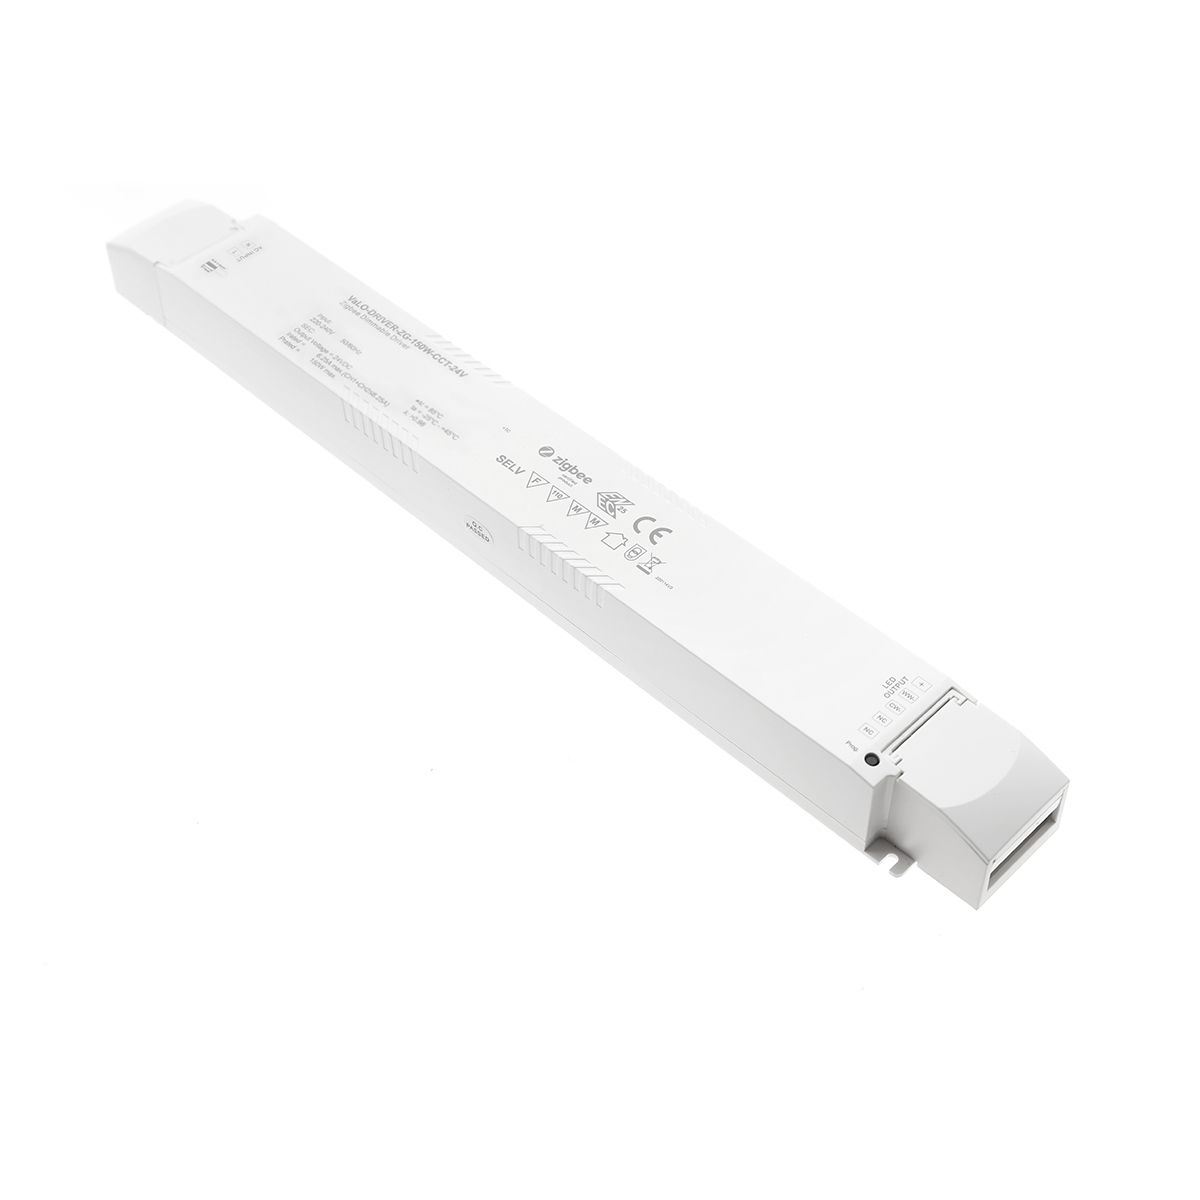 Zigbee LED Strip Drivers for Finnish Company - Control Your Lights with  Ease!